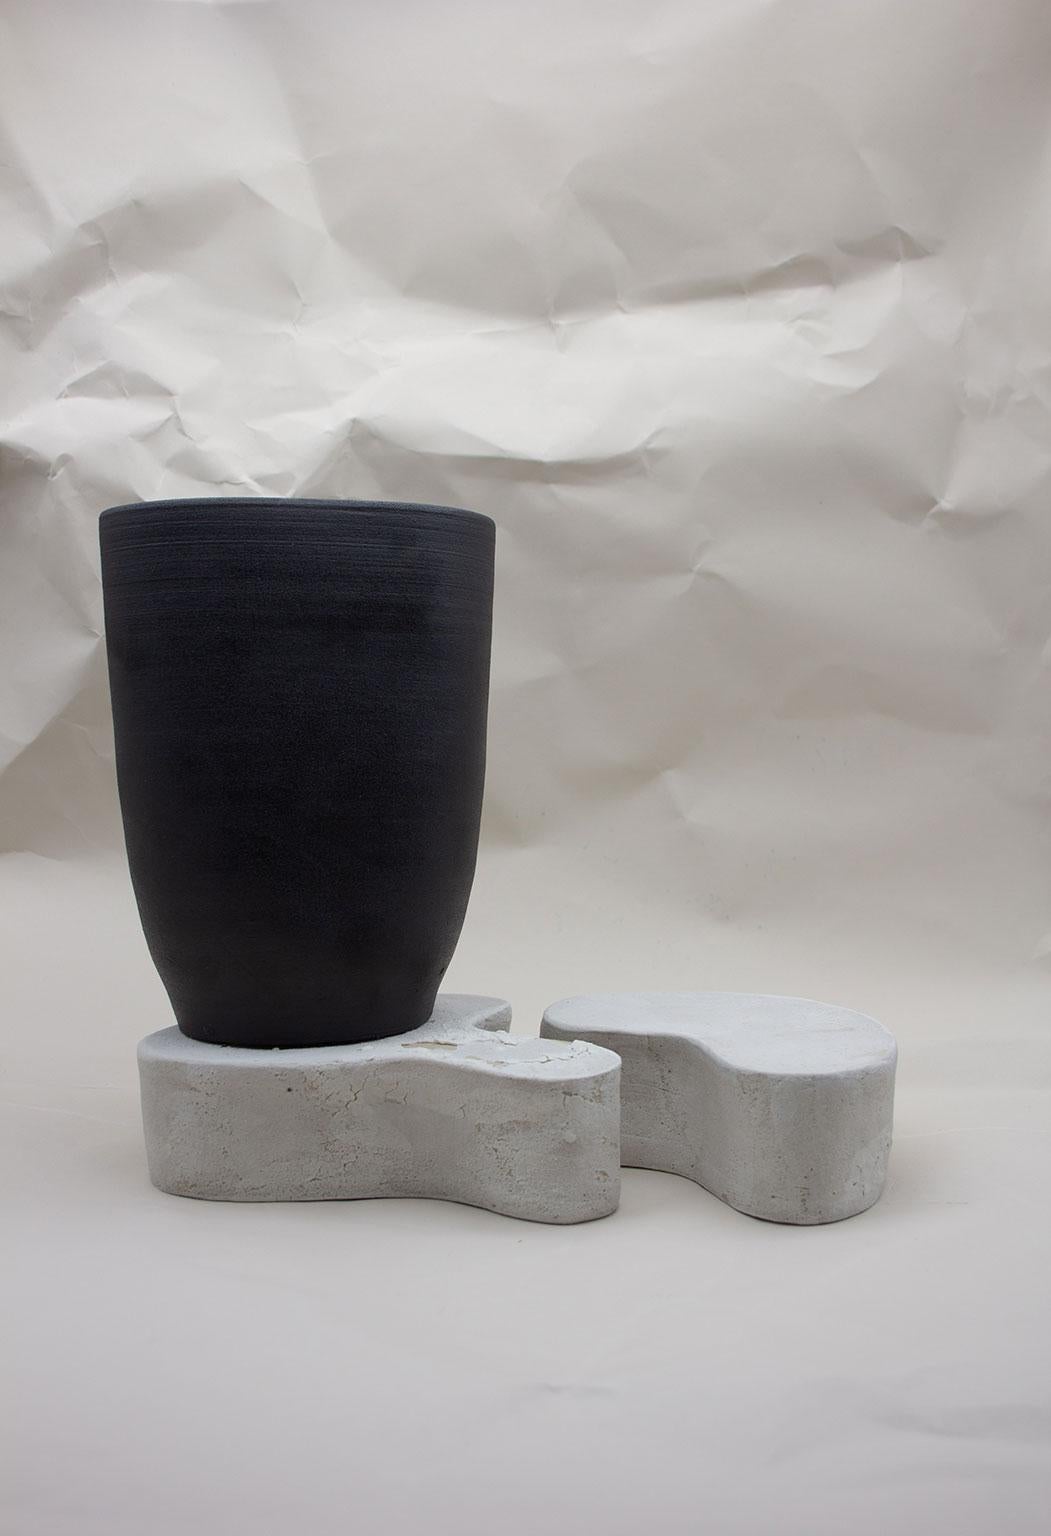 The Black Void vase and two plinths blurs the boundary between a functional vase and a sculptural object. Created as part of the Soft, Soft Hard 2018 collection, these pieces are an exploration into form and the relationship between the wheel and